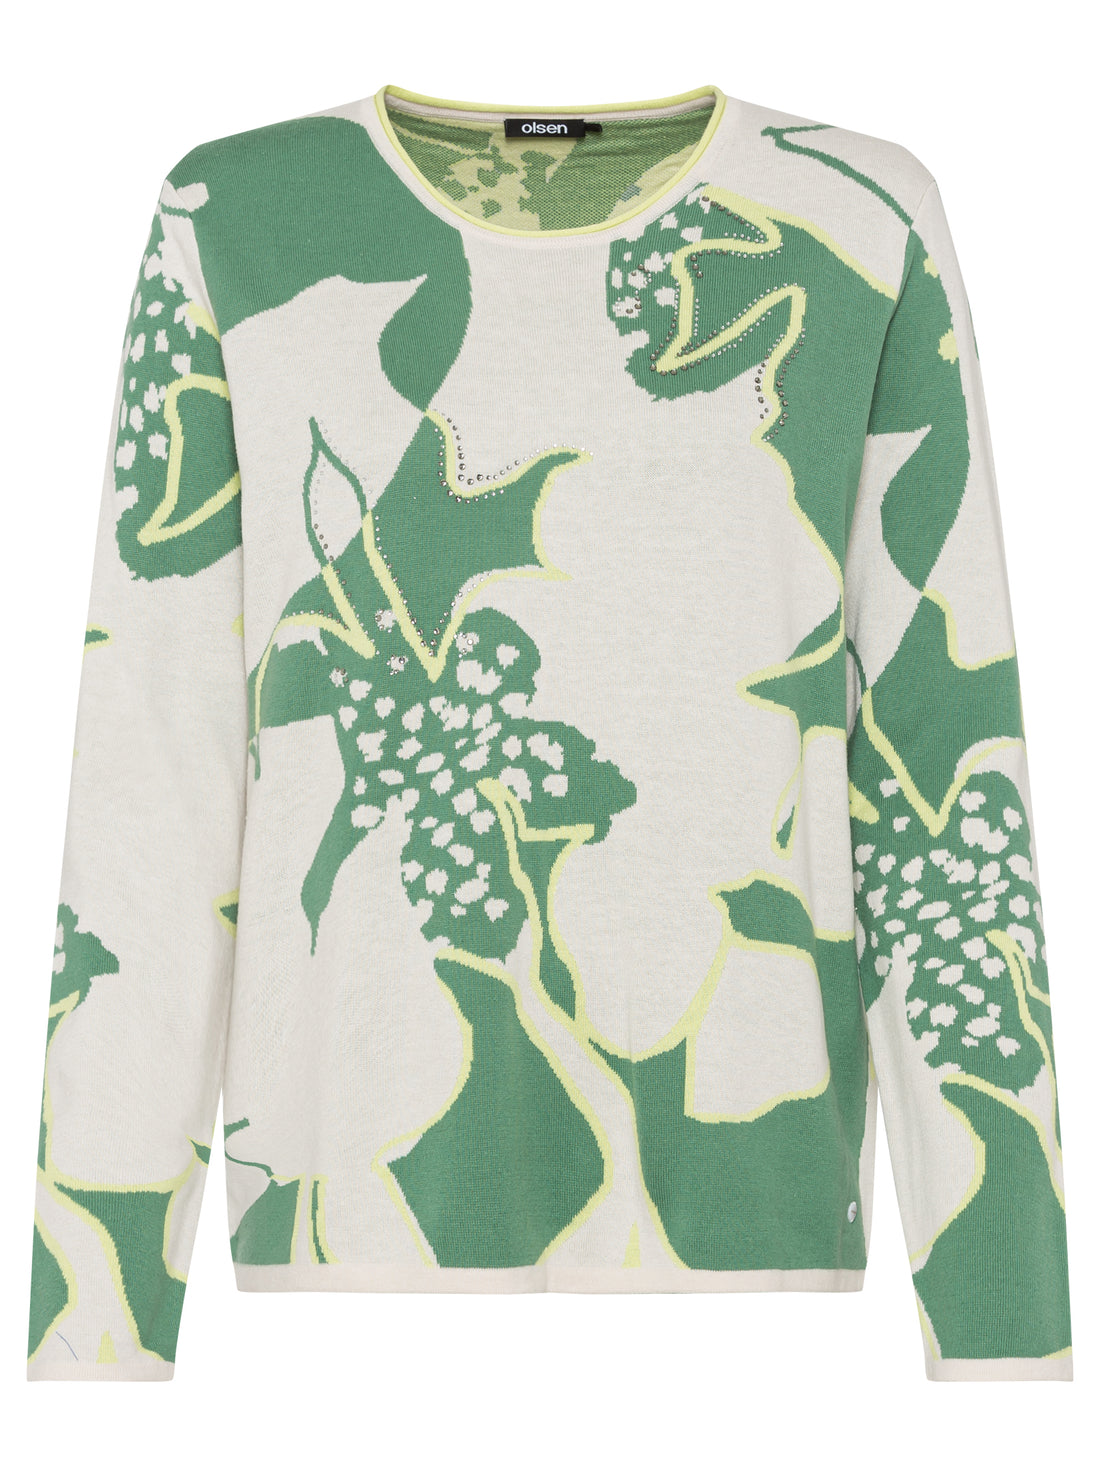 Olsen - Cream and Green Flower and Sequin Print Jumper